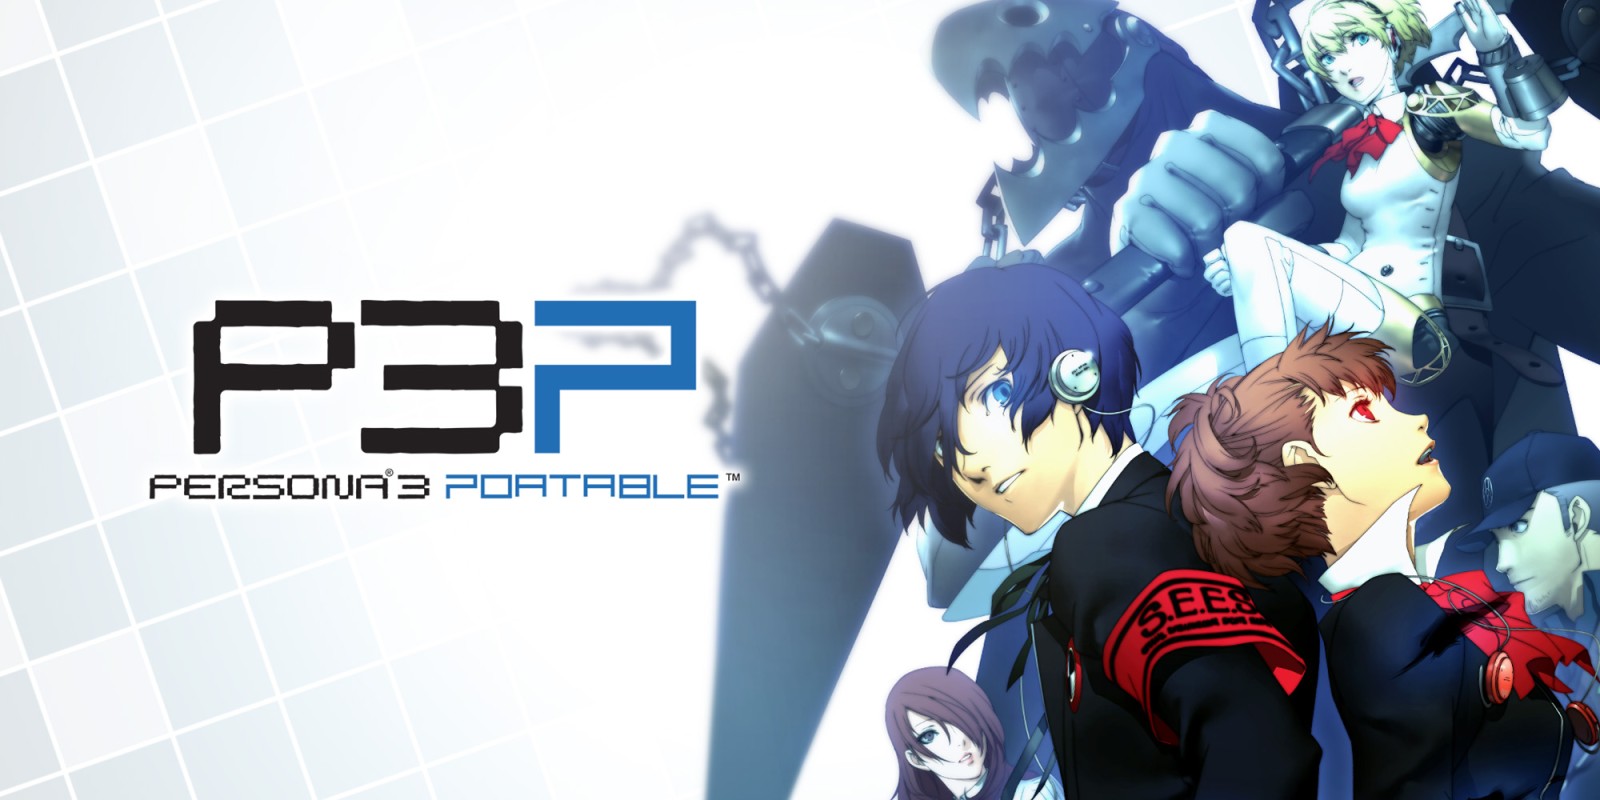 Persona 3 Portable PS4 Version Full Game Free Download